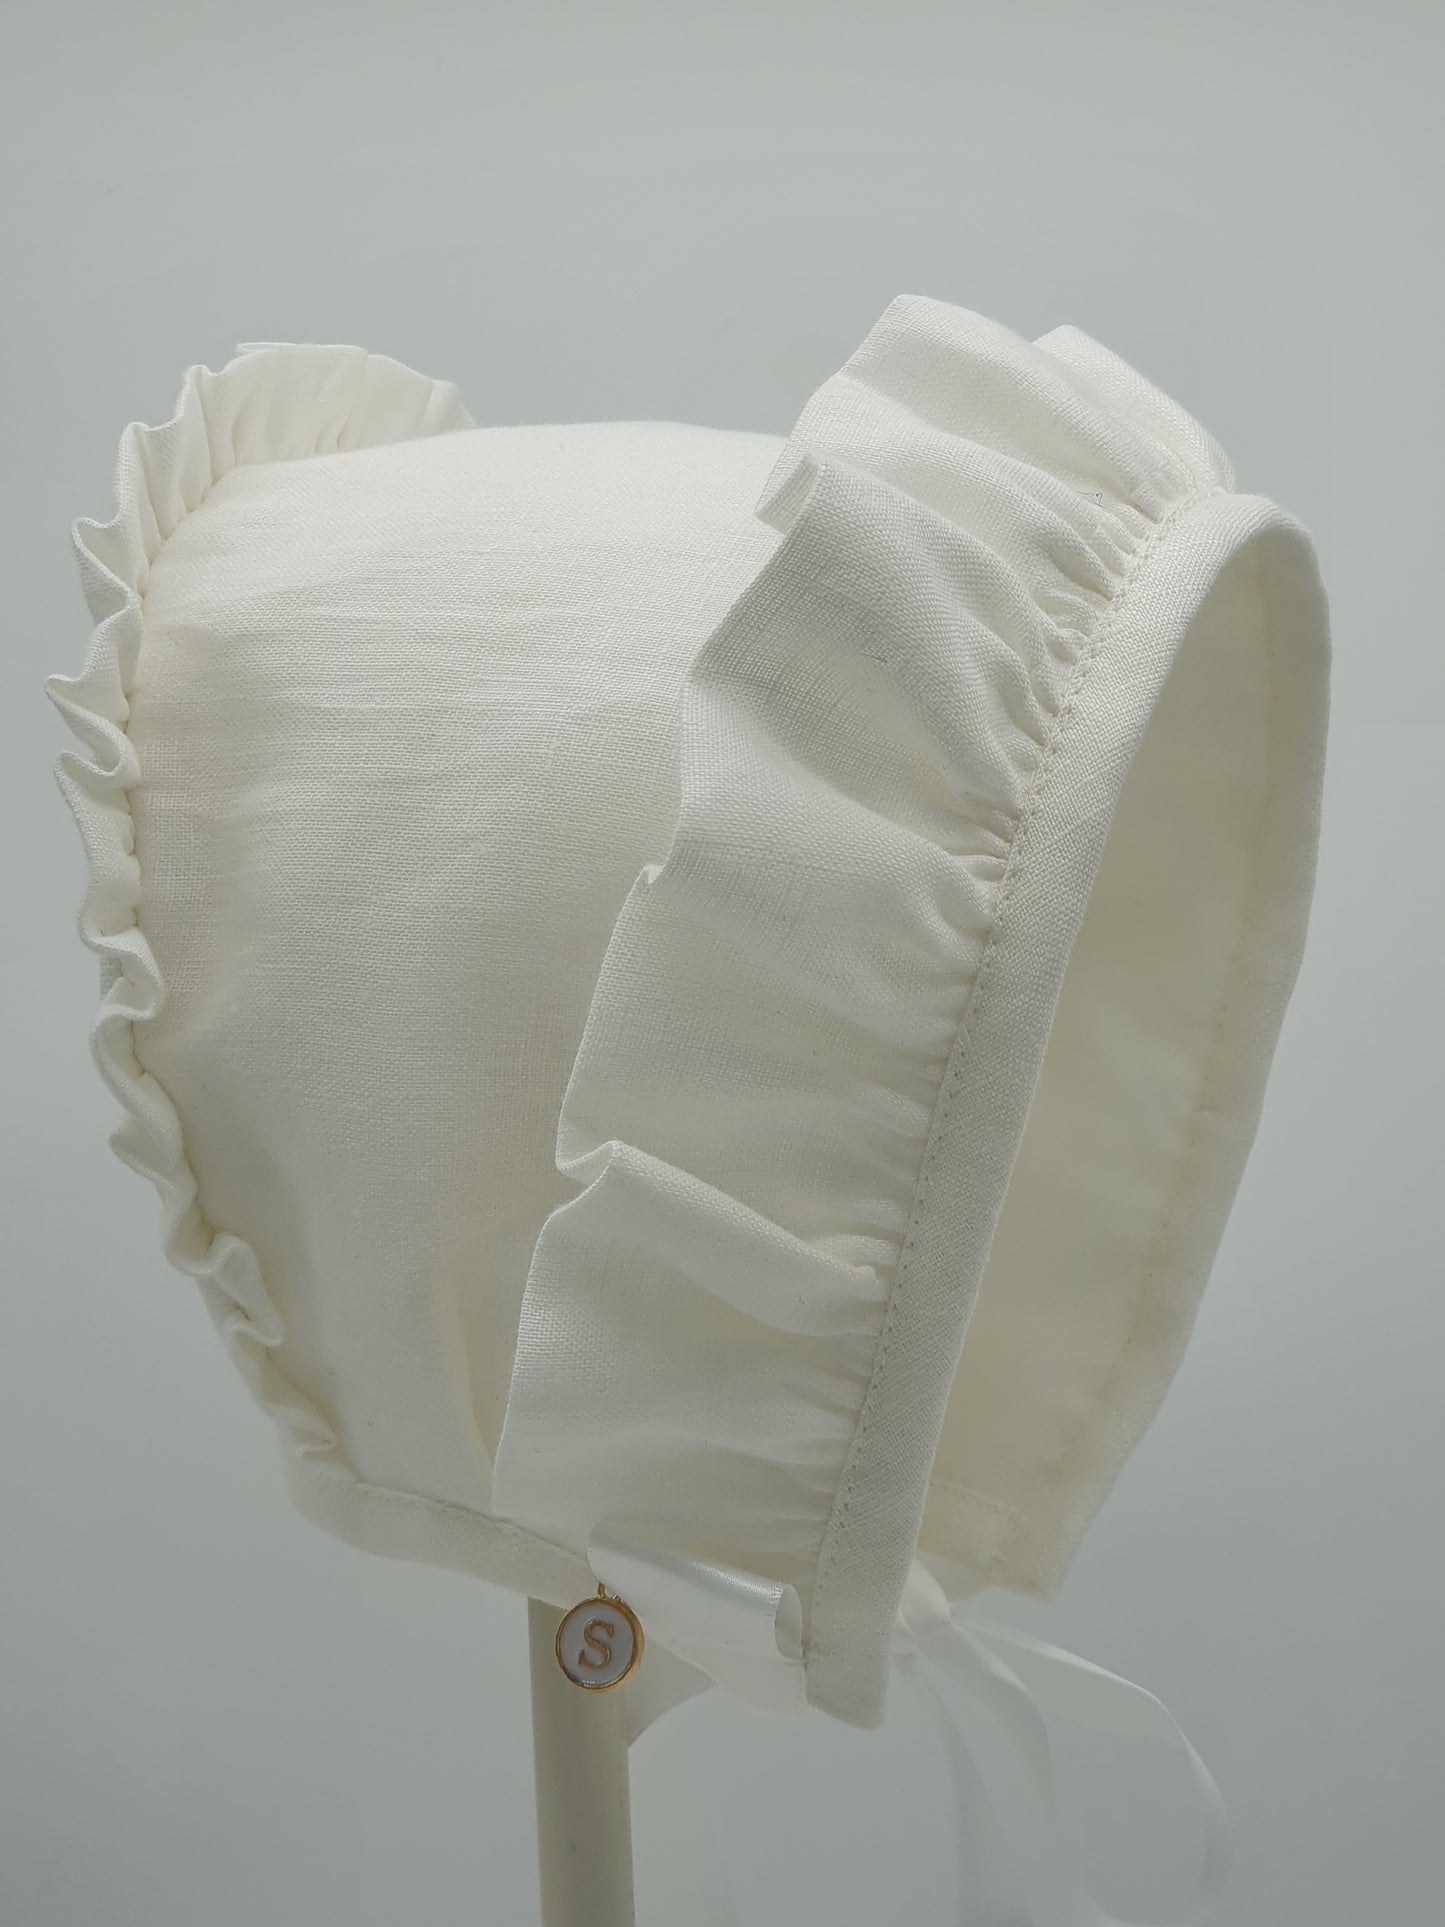 Small Dreams Exclusive Bonnet,  White Linen with embroidery